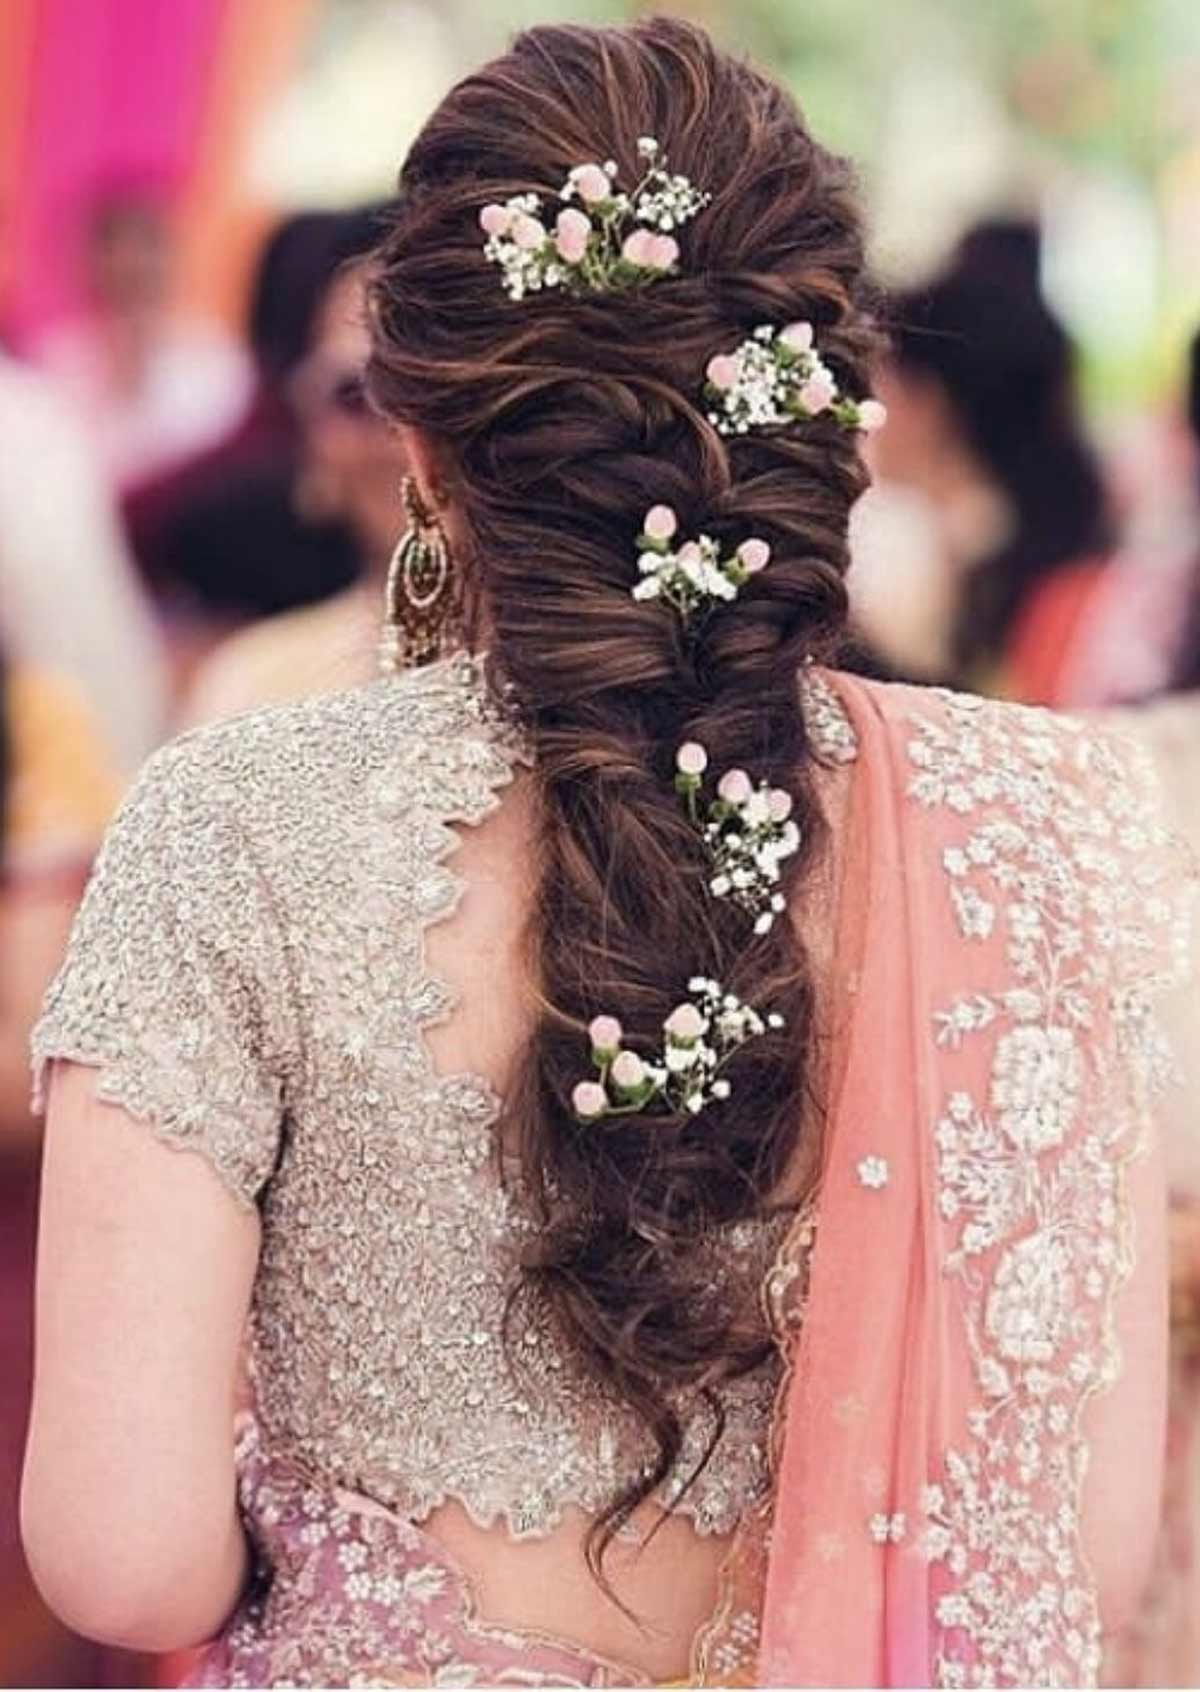 Hairstyles For Bride Or Groom's Sister - YouTube